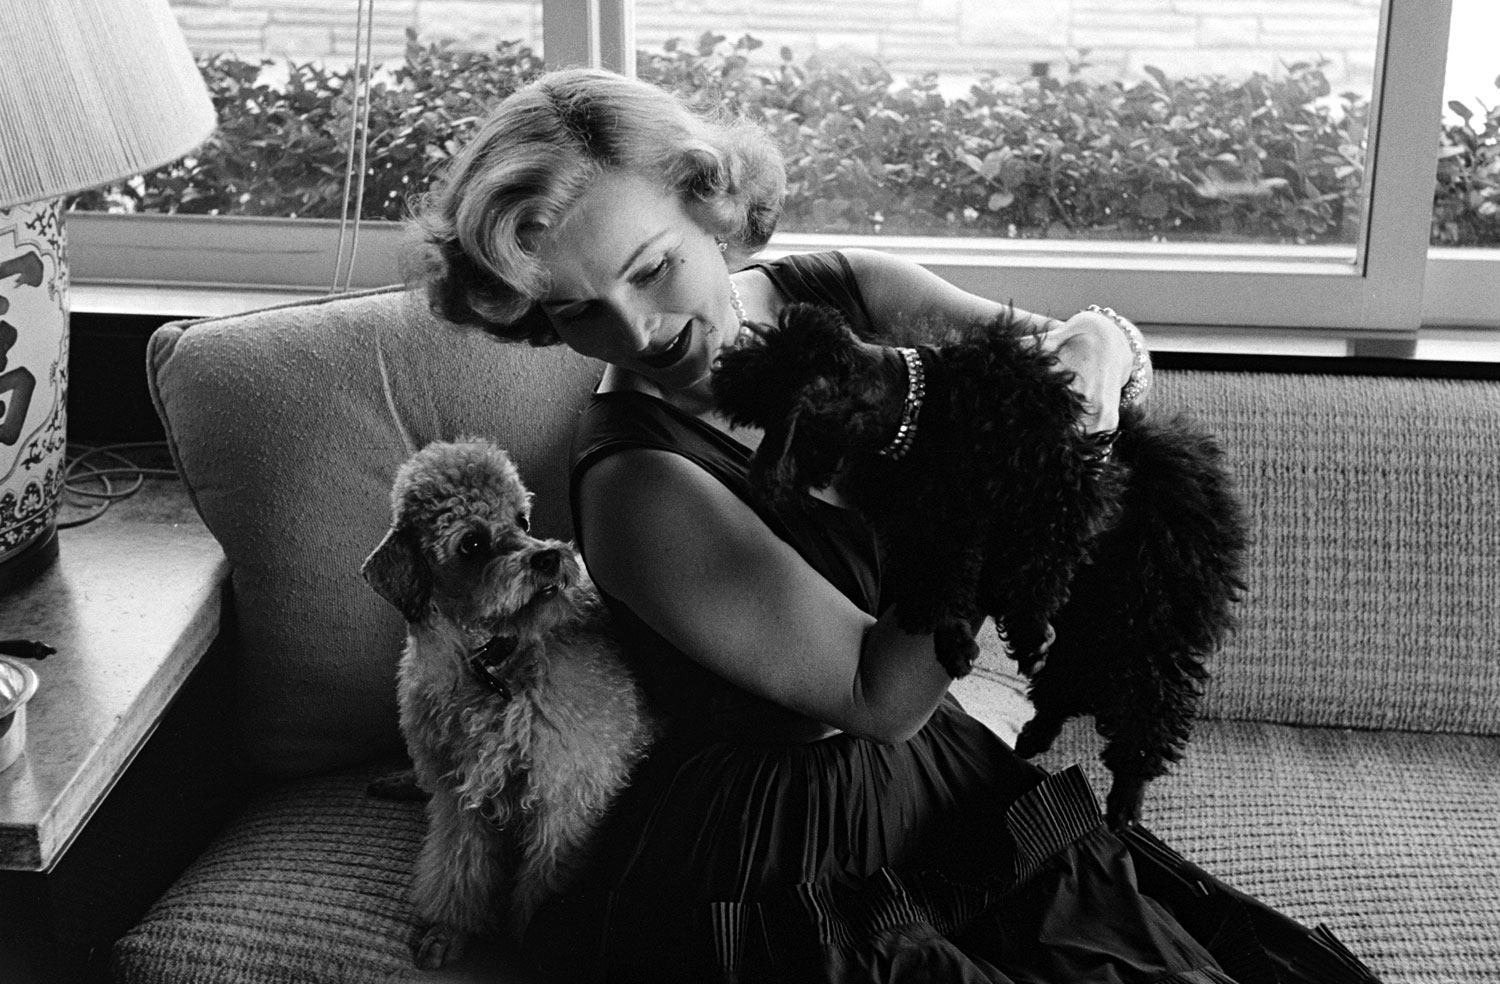 Zsa Zsa Gabor with her dogs, Harvey Hilton (grey) and Farouk (black), California, 1951.